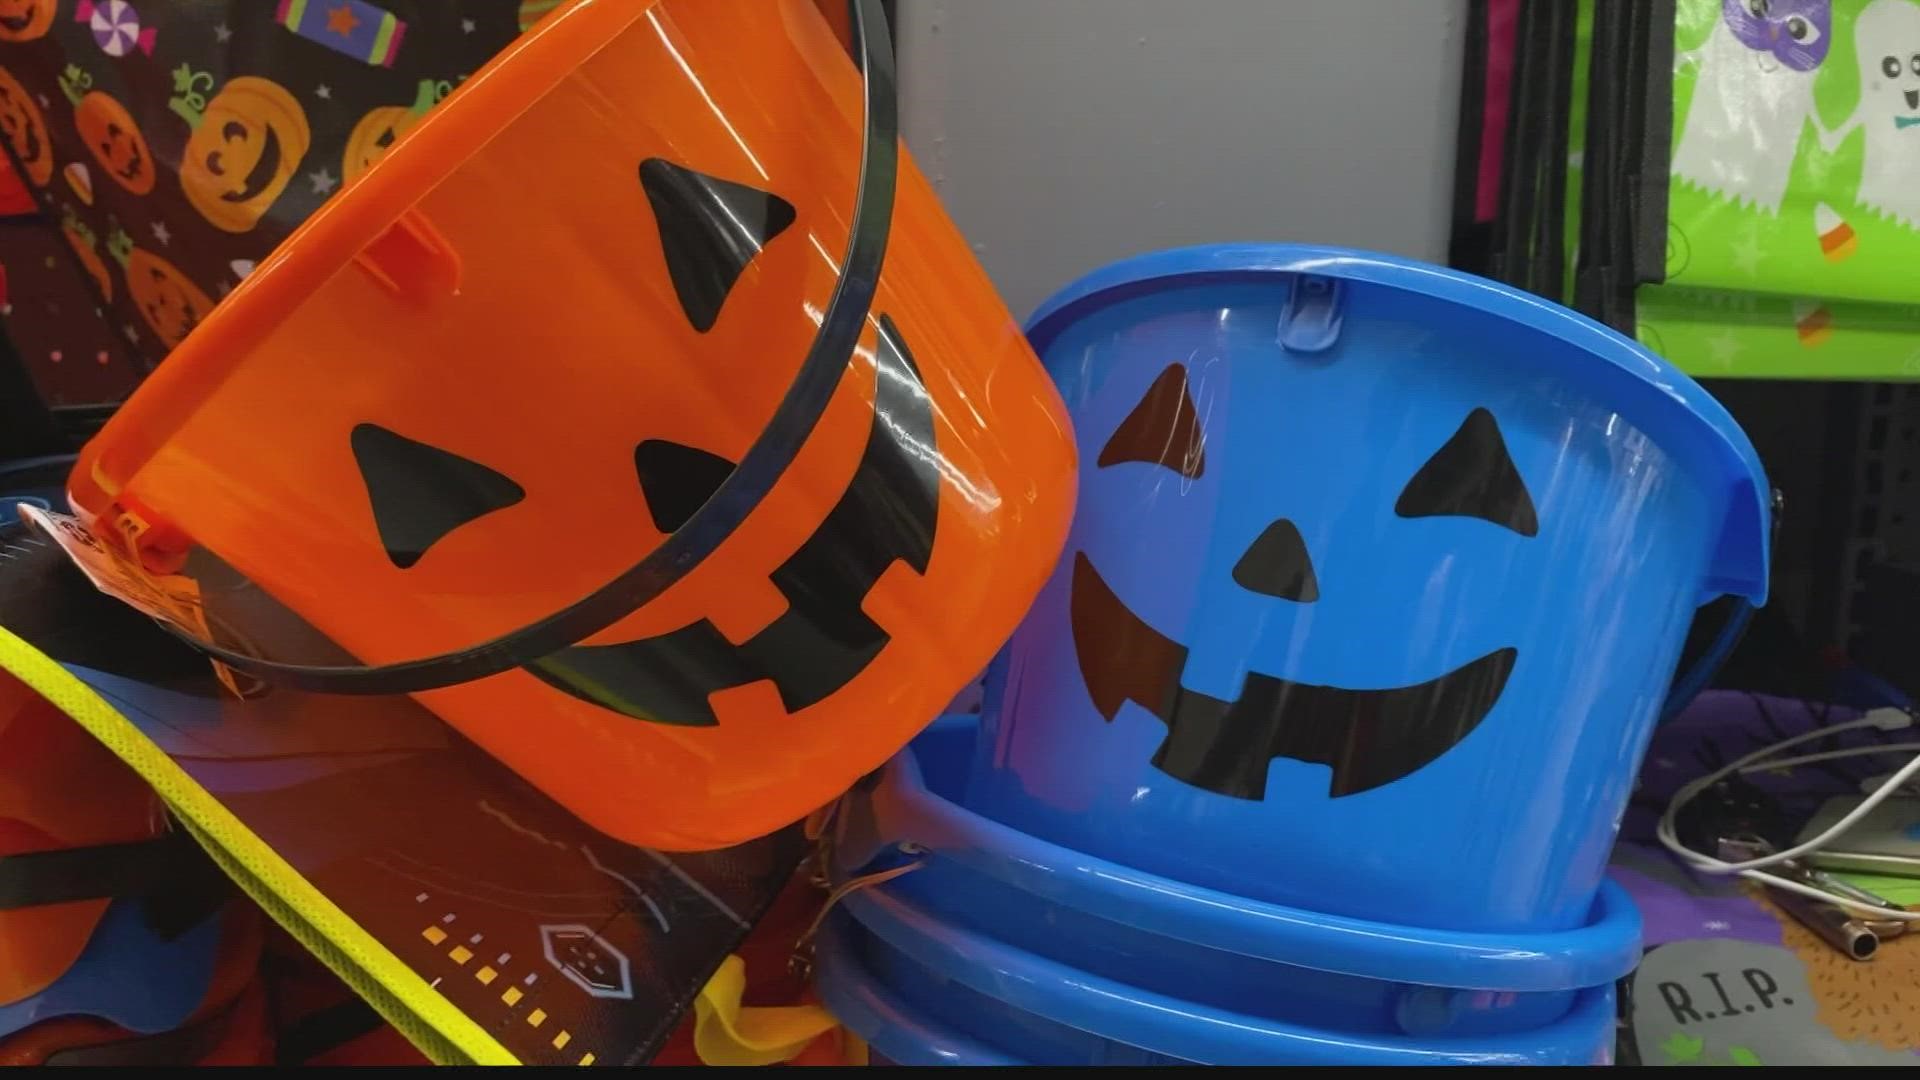 Those blue pumpkin candy buckets help children with autism to better trick-or-treat and people to better understand them.